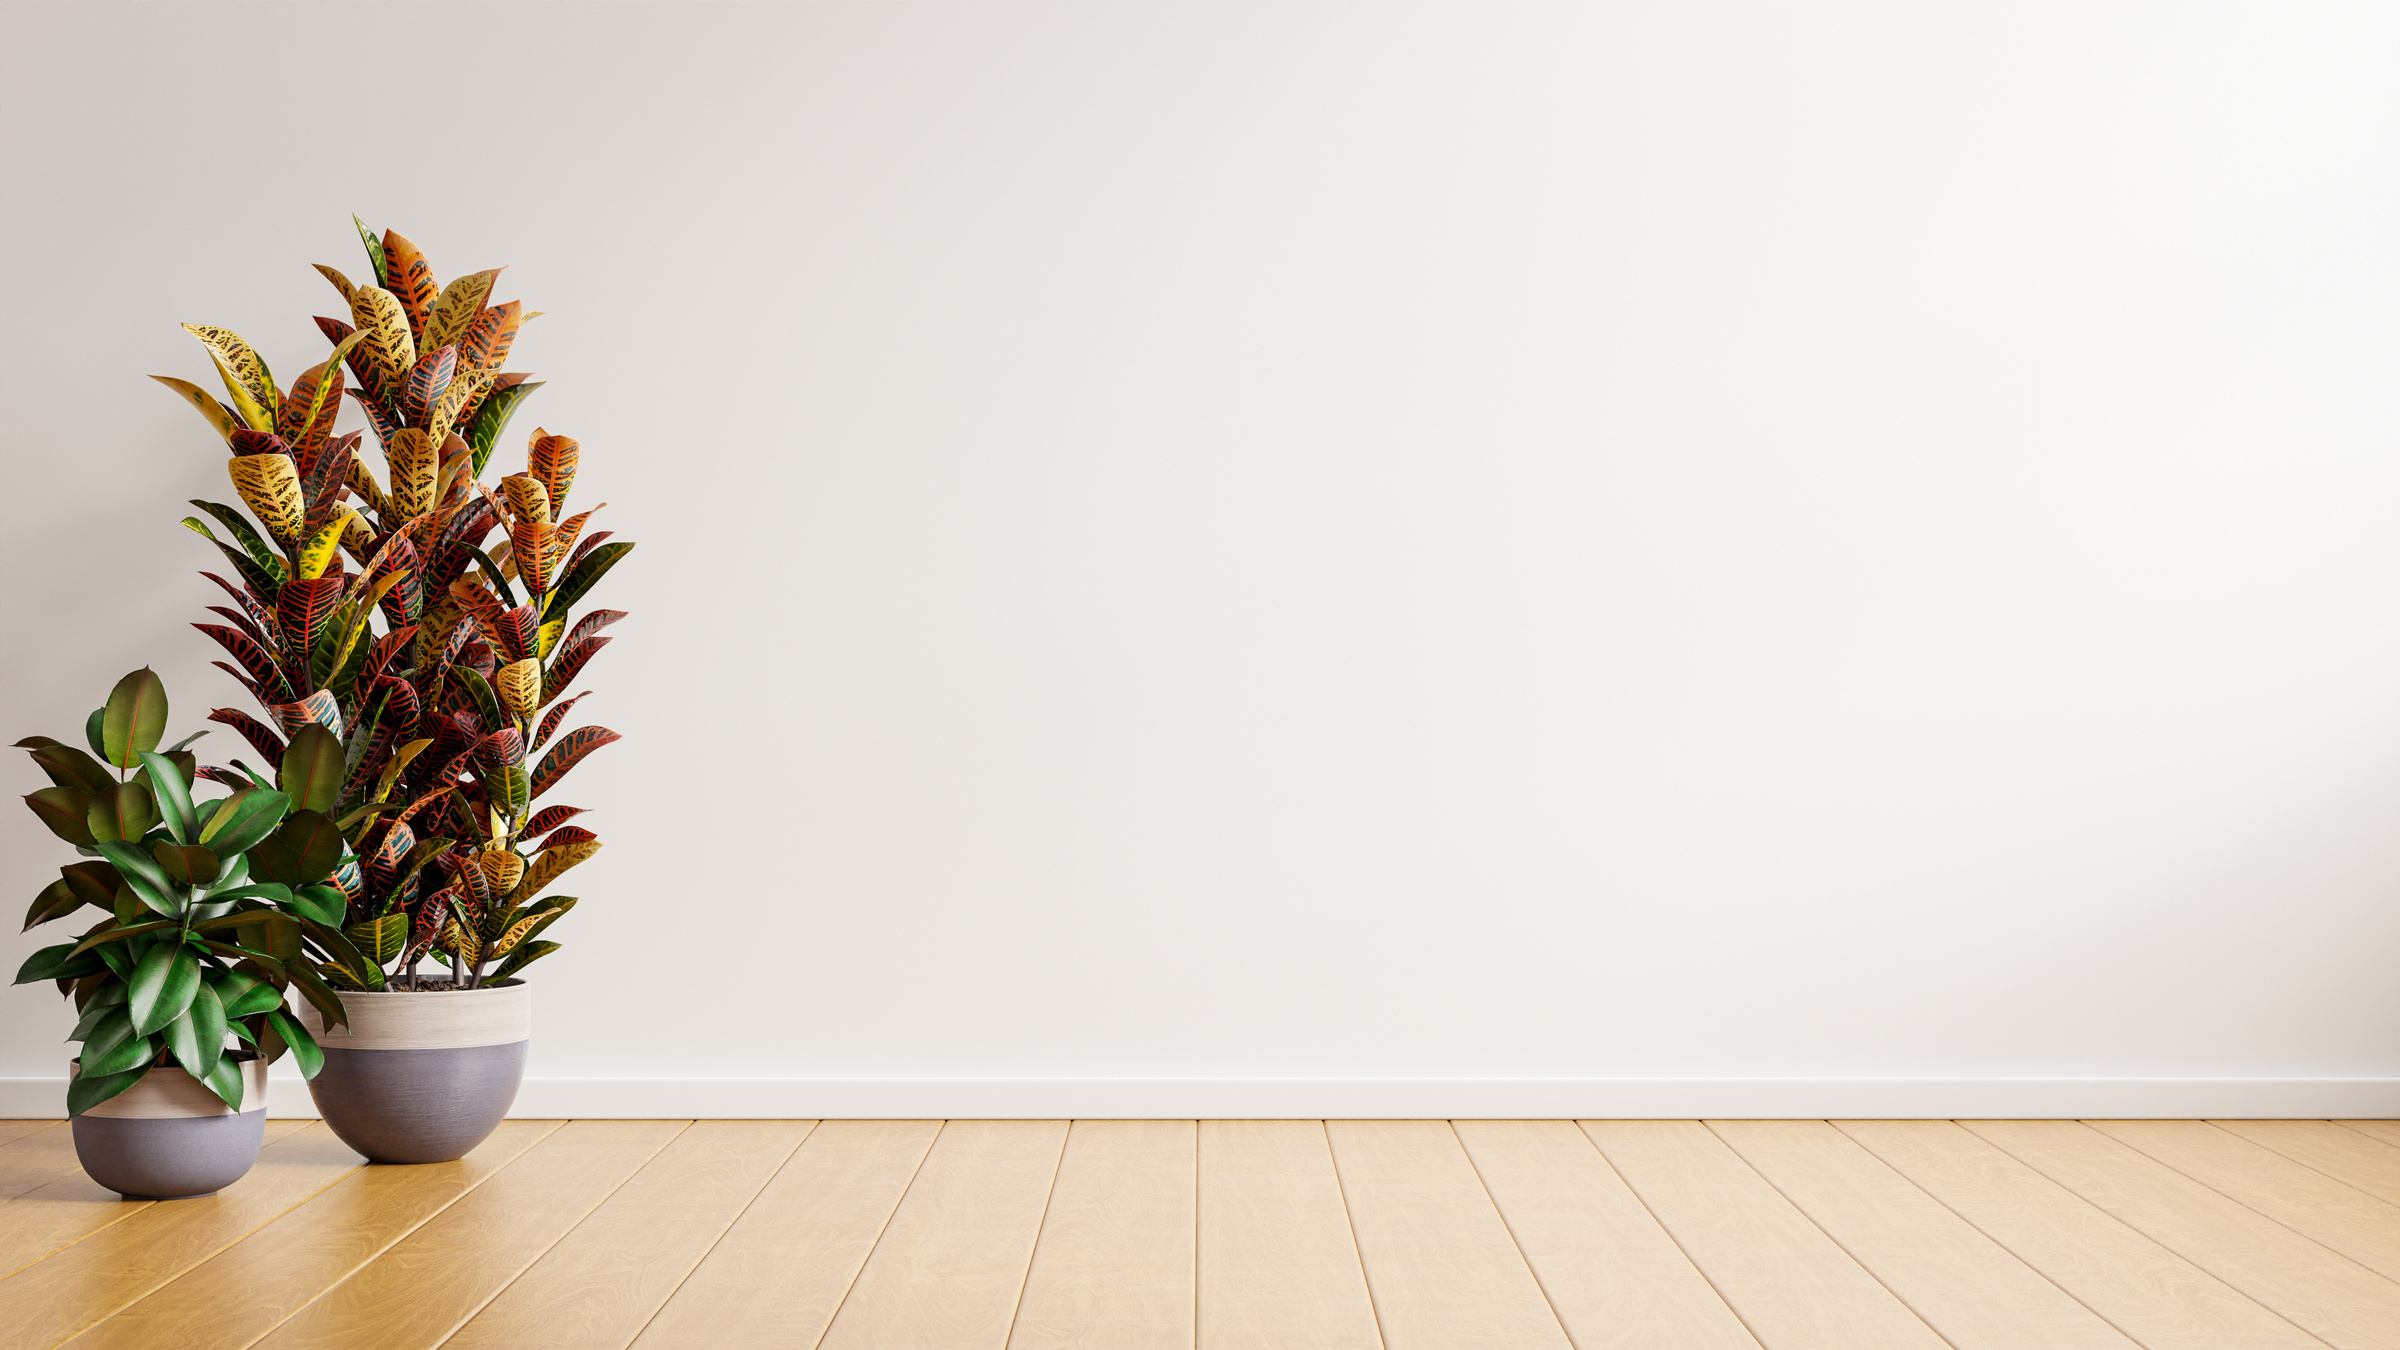 White Wall Empty Room with Plants on a Floor